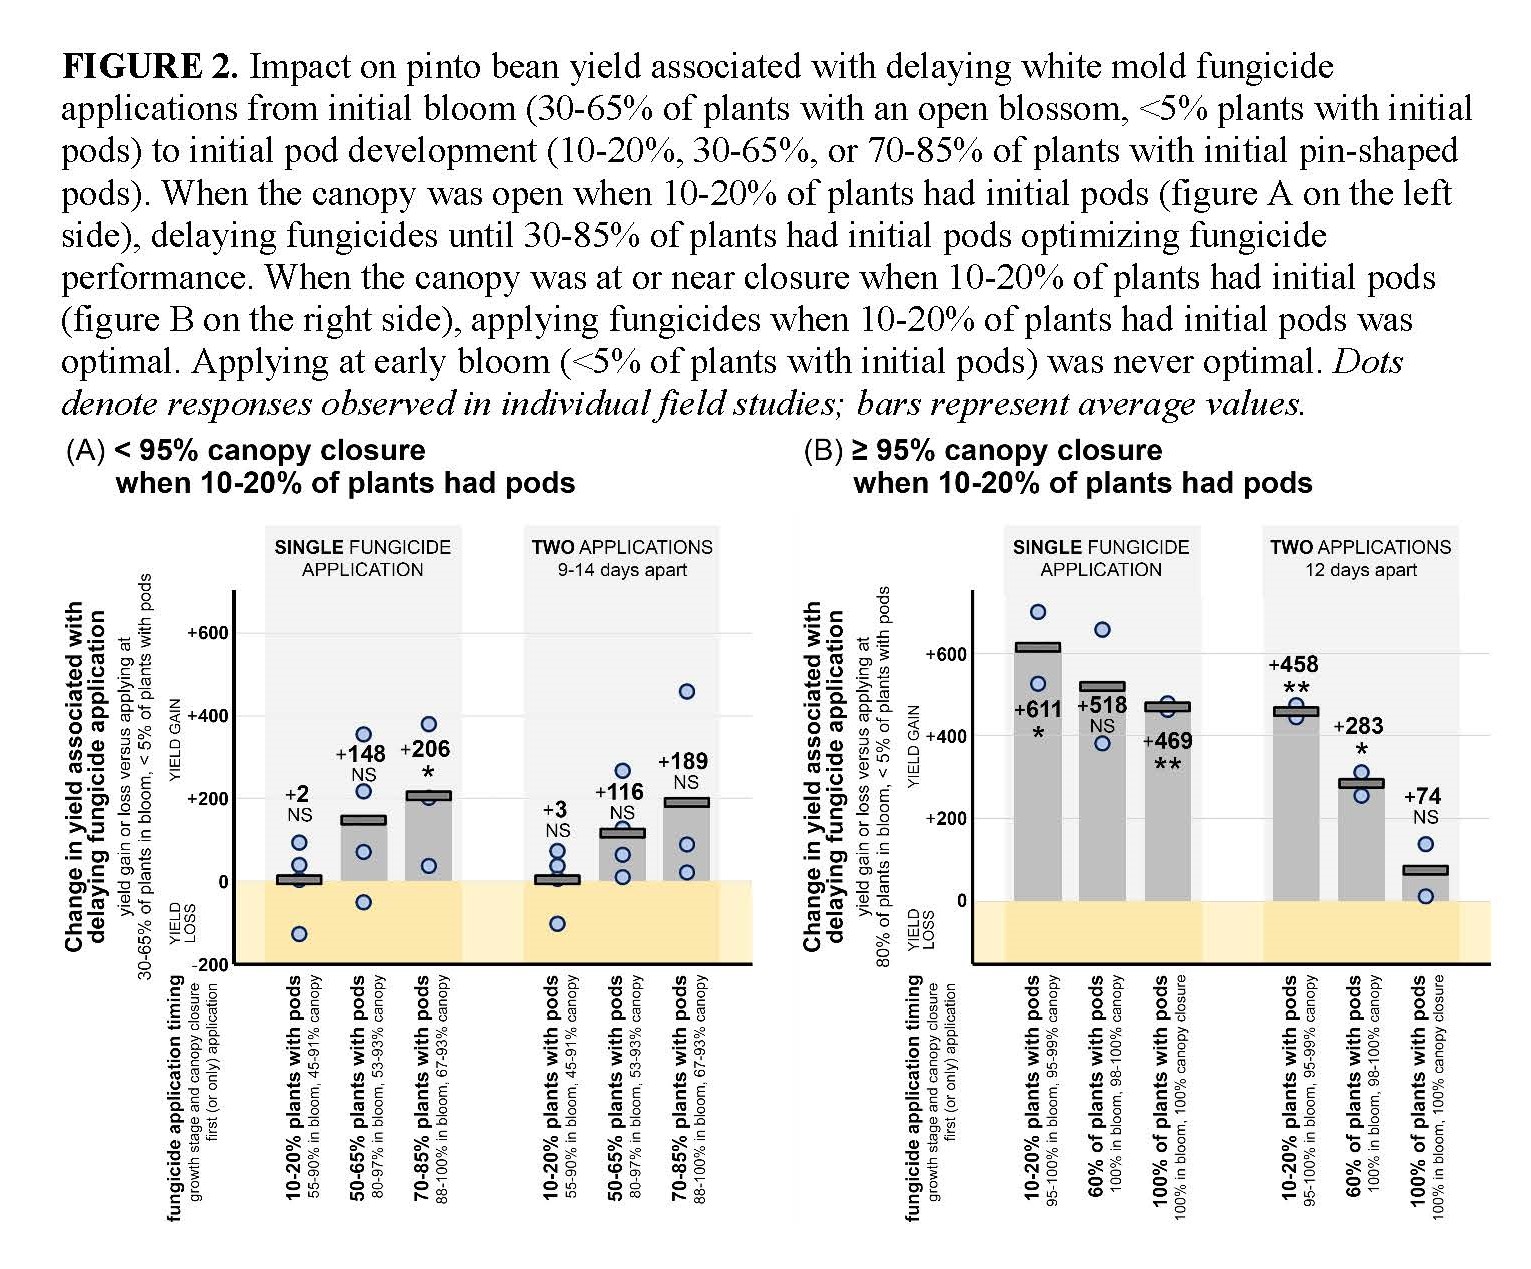 Impact on pinto bean yield associated with delaying white mold fungicide applications from initial bloom (30-65% of plants with an open blossom, <5% plants with initial pods) to initial pod development (10-20%, 30-65%, or 70-85% of plants with initial pin-shaped pods).